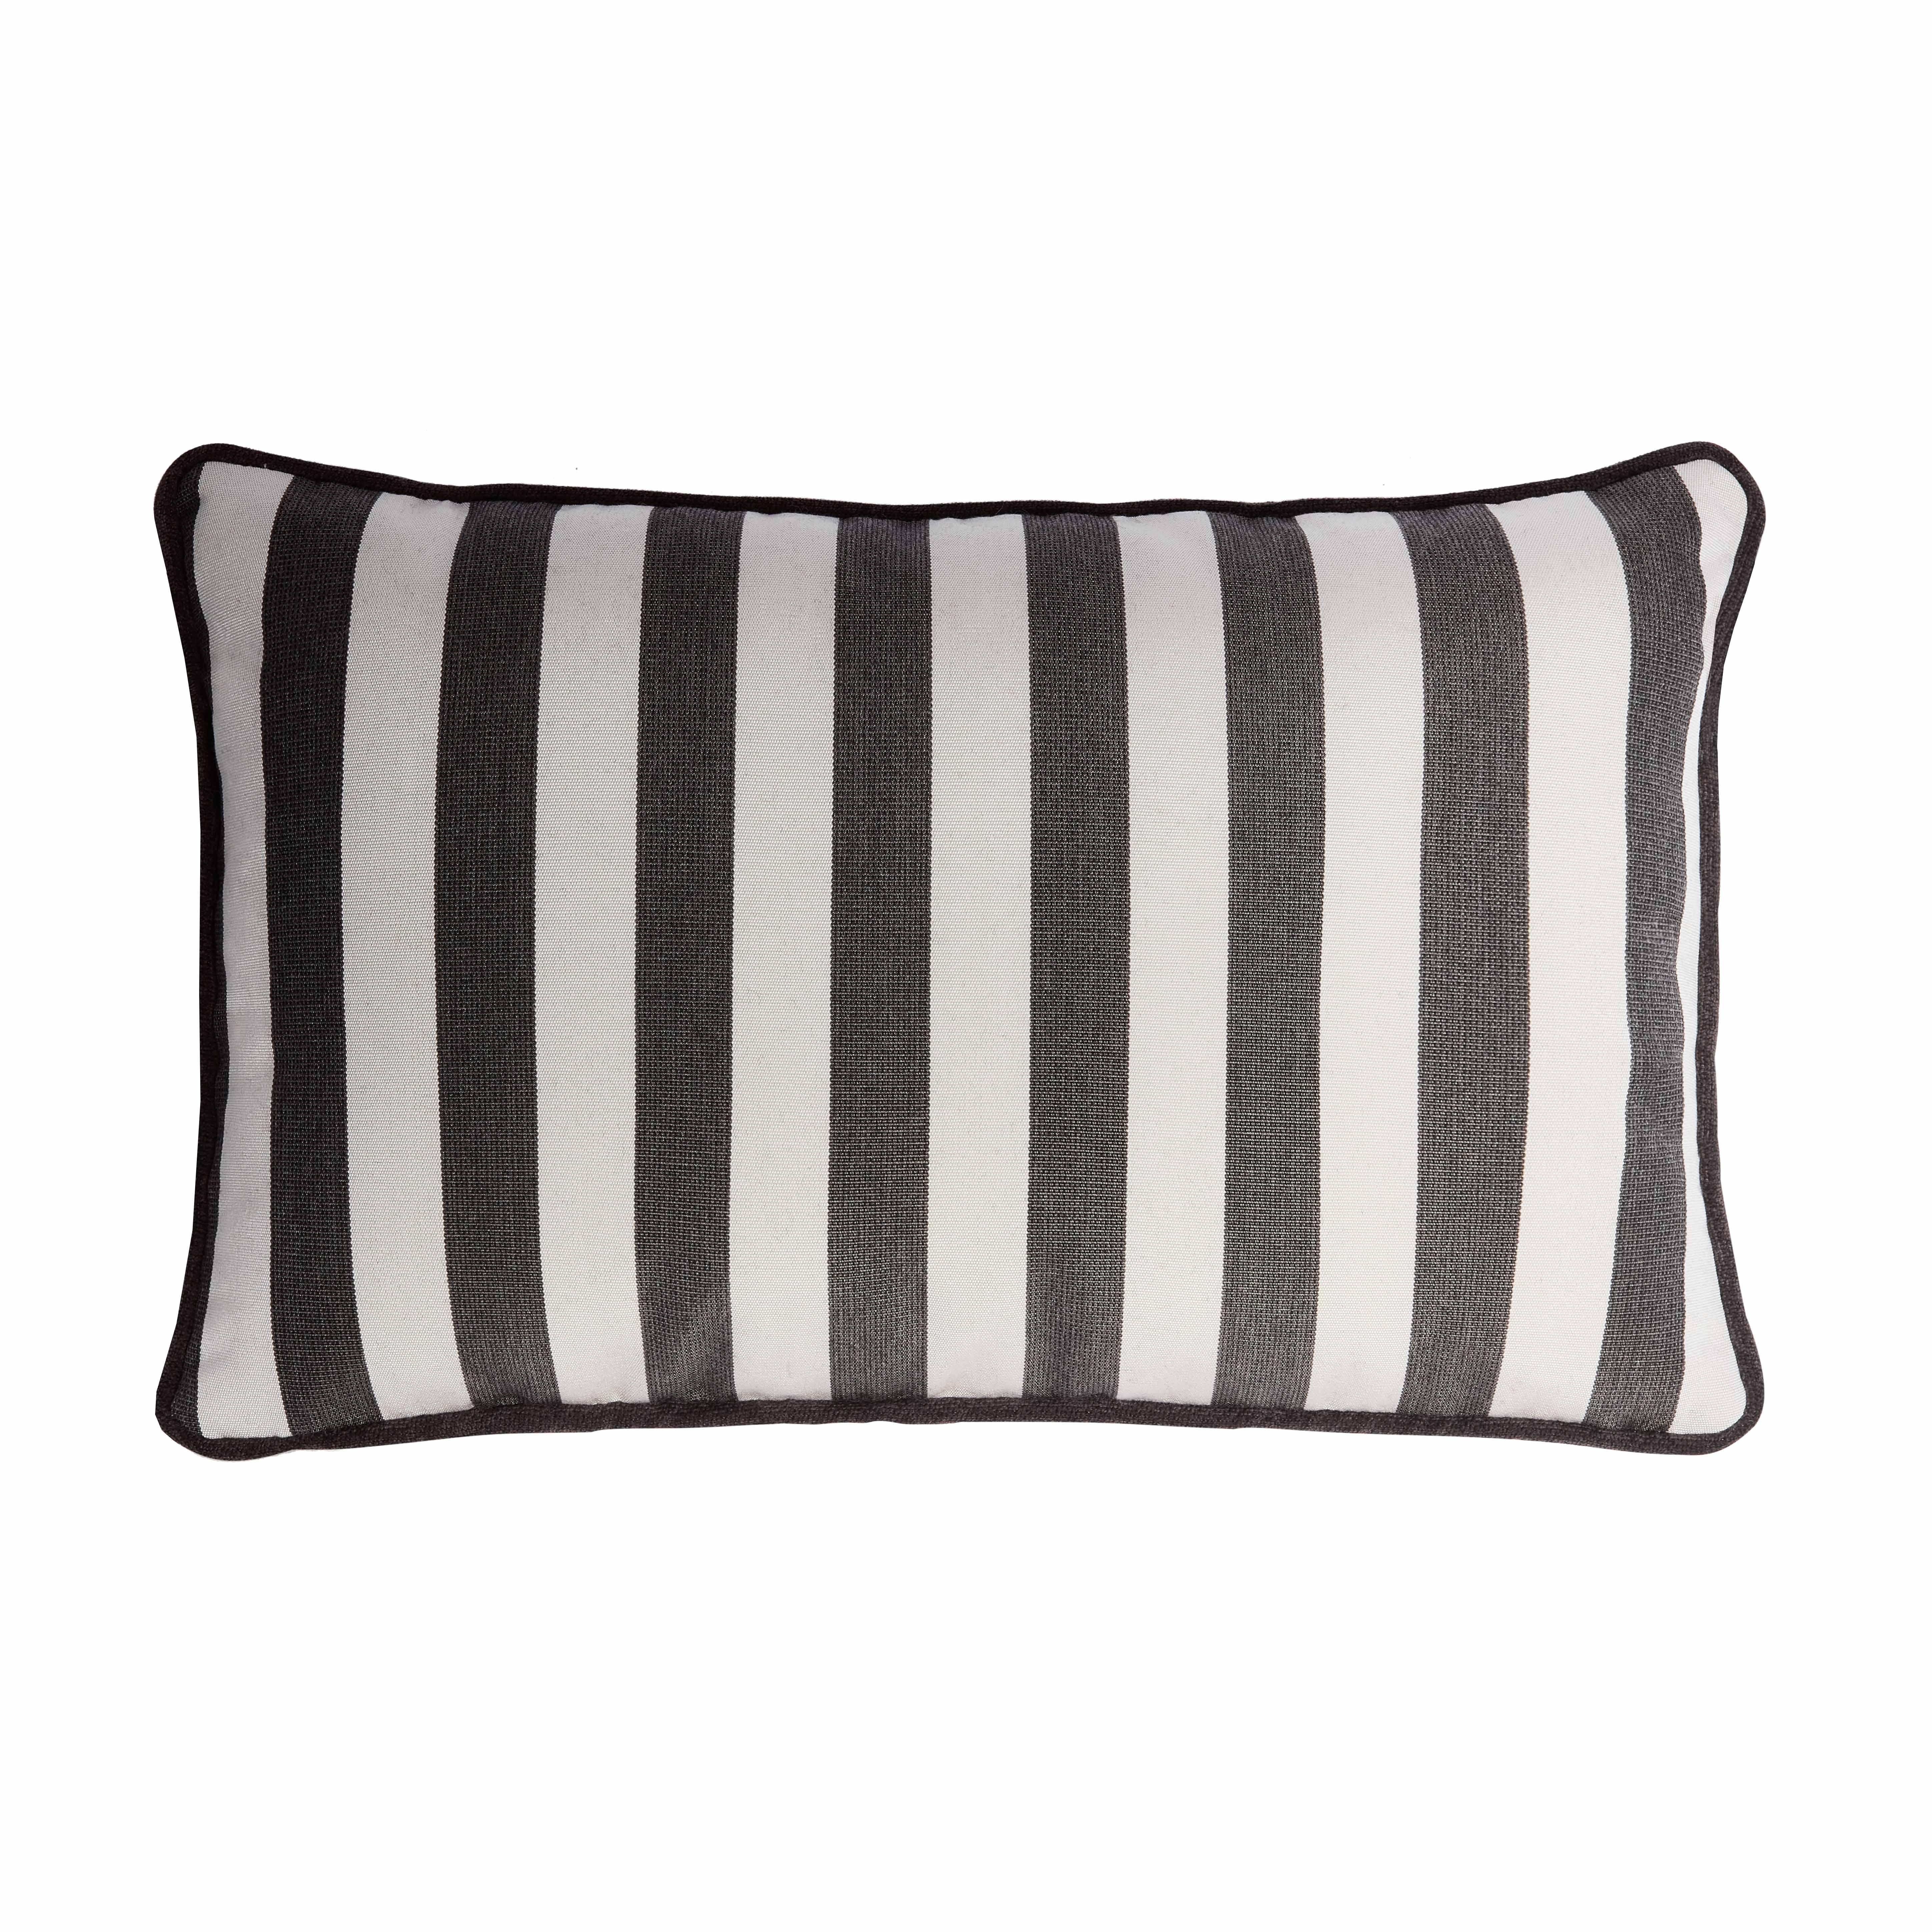 Hand-Crafted Striped Happy Pillow Outdoor with Piping Beige and White For Sale